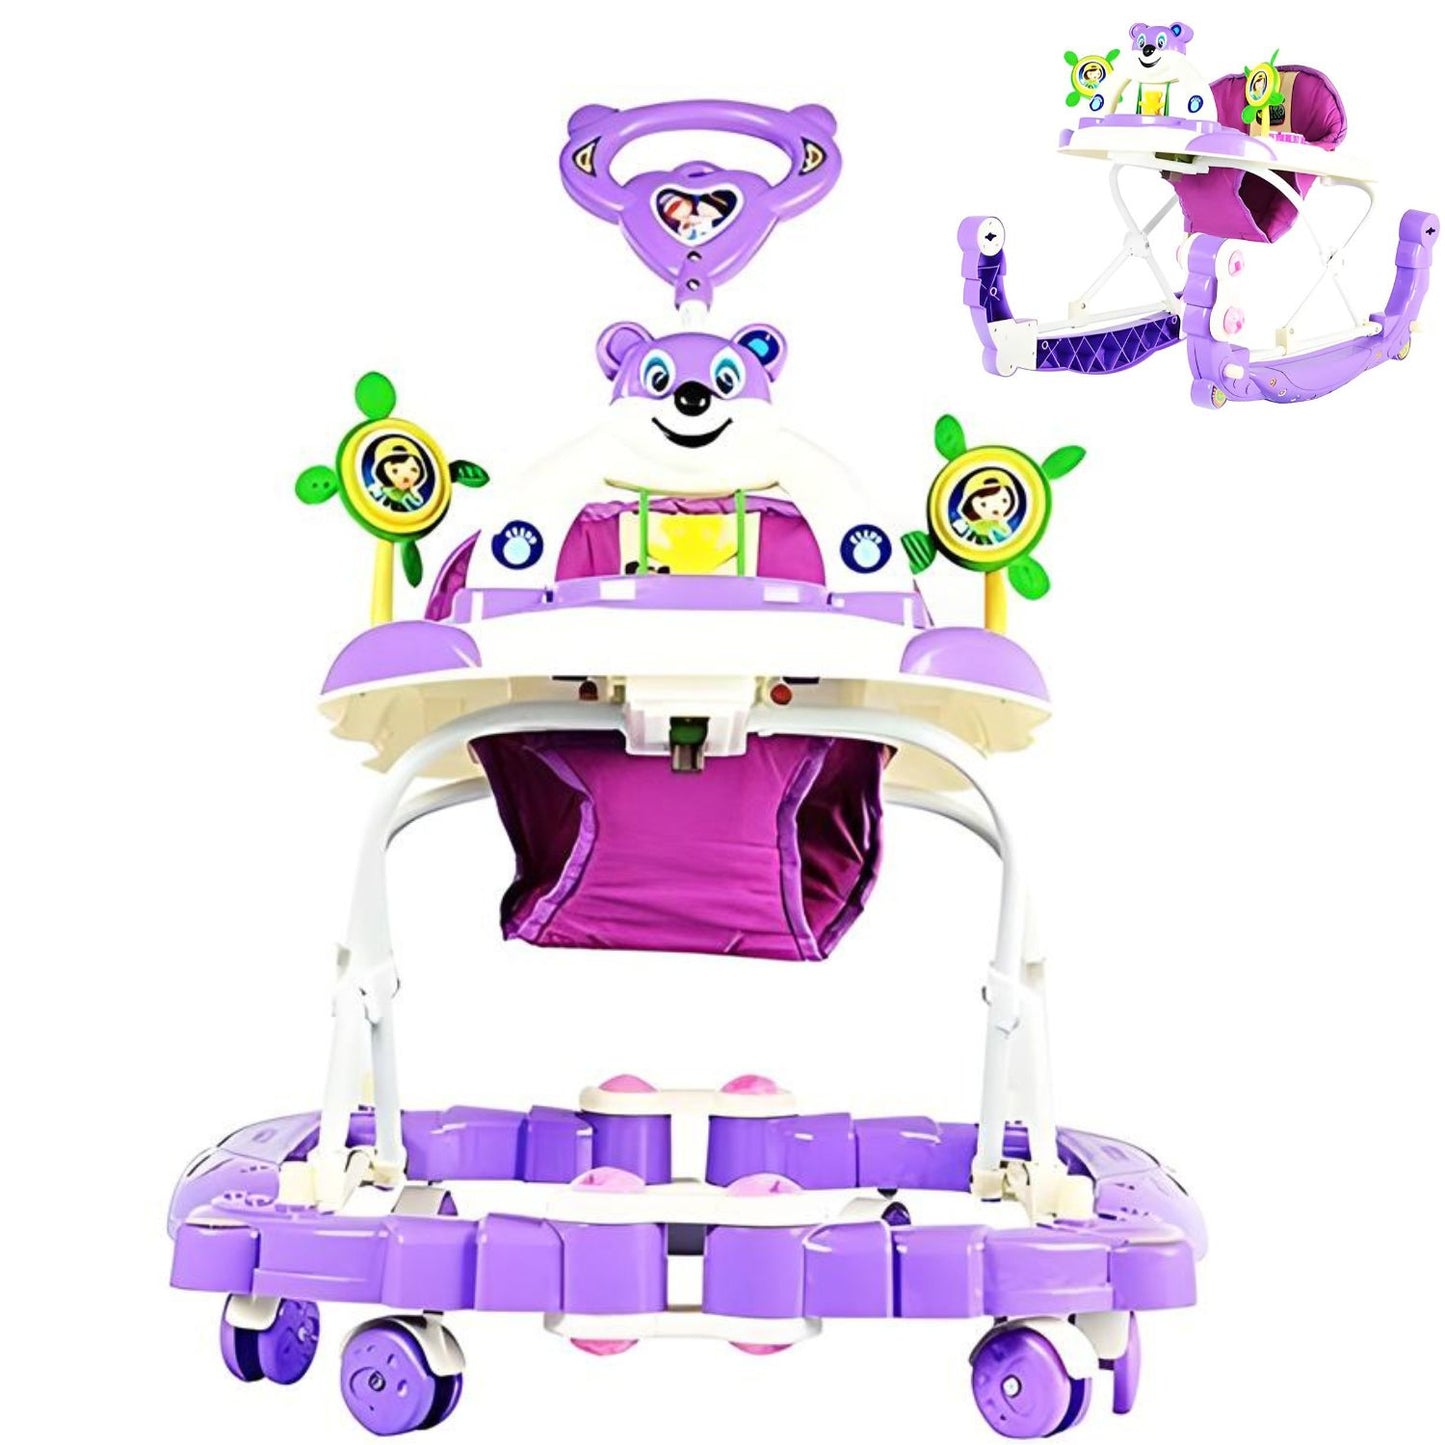 Panda Baby 2 in 1 Walker And Rocker 3 Height Adjustable And Parent Handle For 6+ Months - Purple